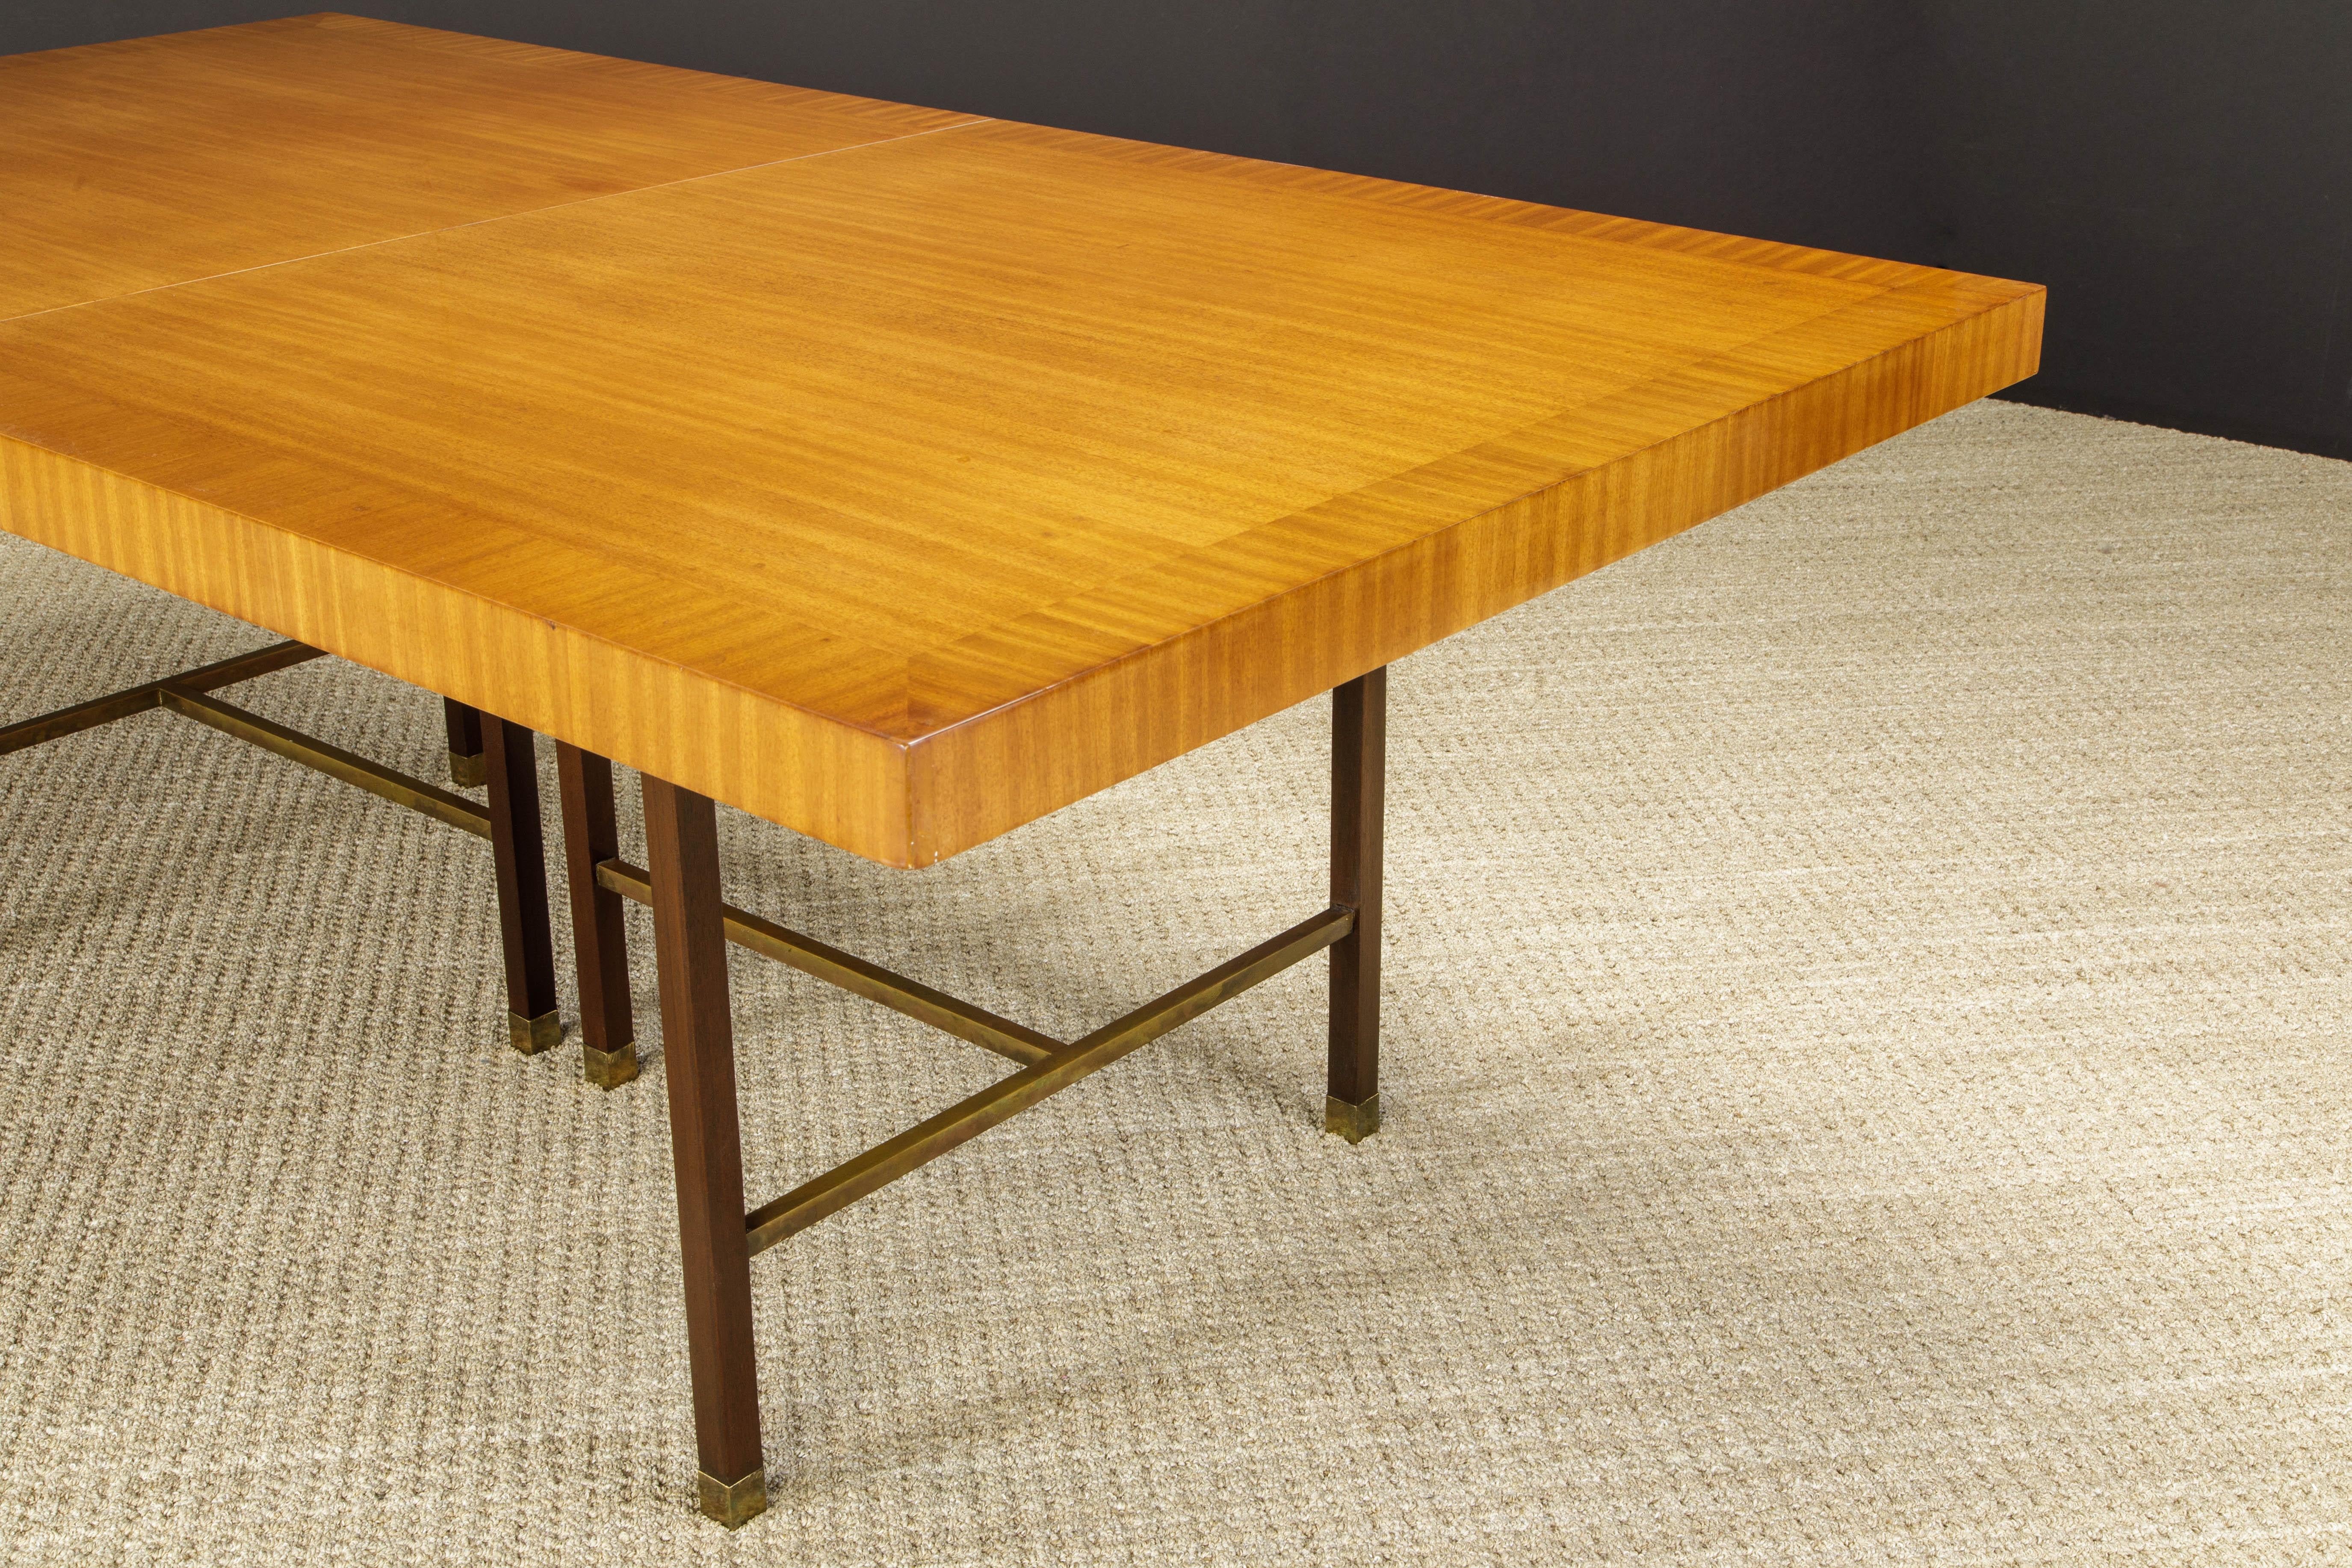 Harvey Probber 12-Person Extendable Dining Table in Mahogany and Brass, 1950s For Sale 7